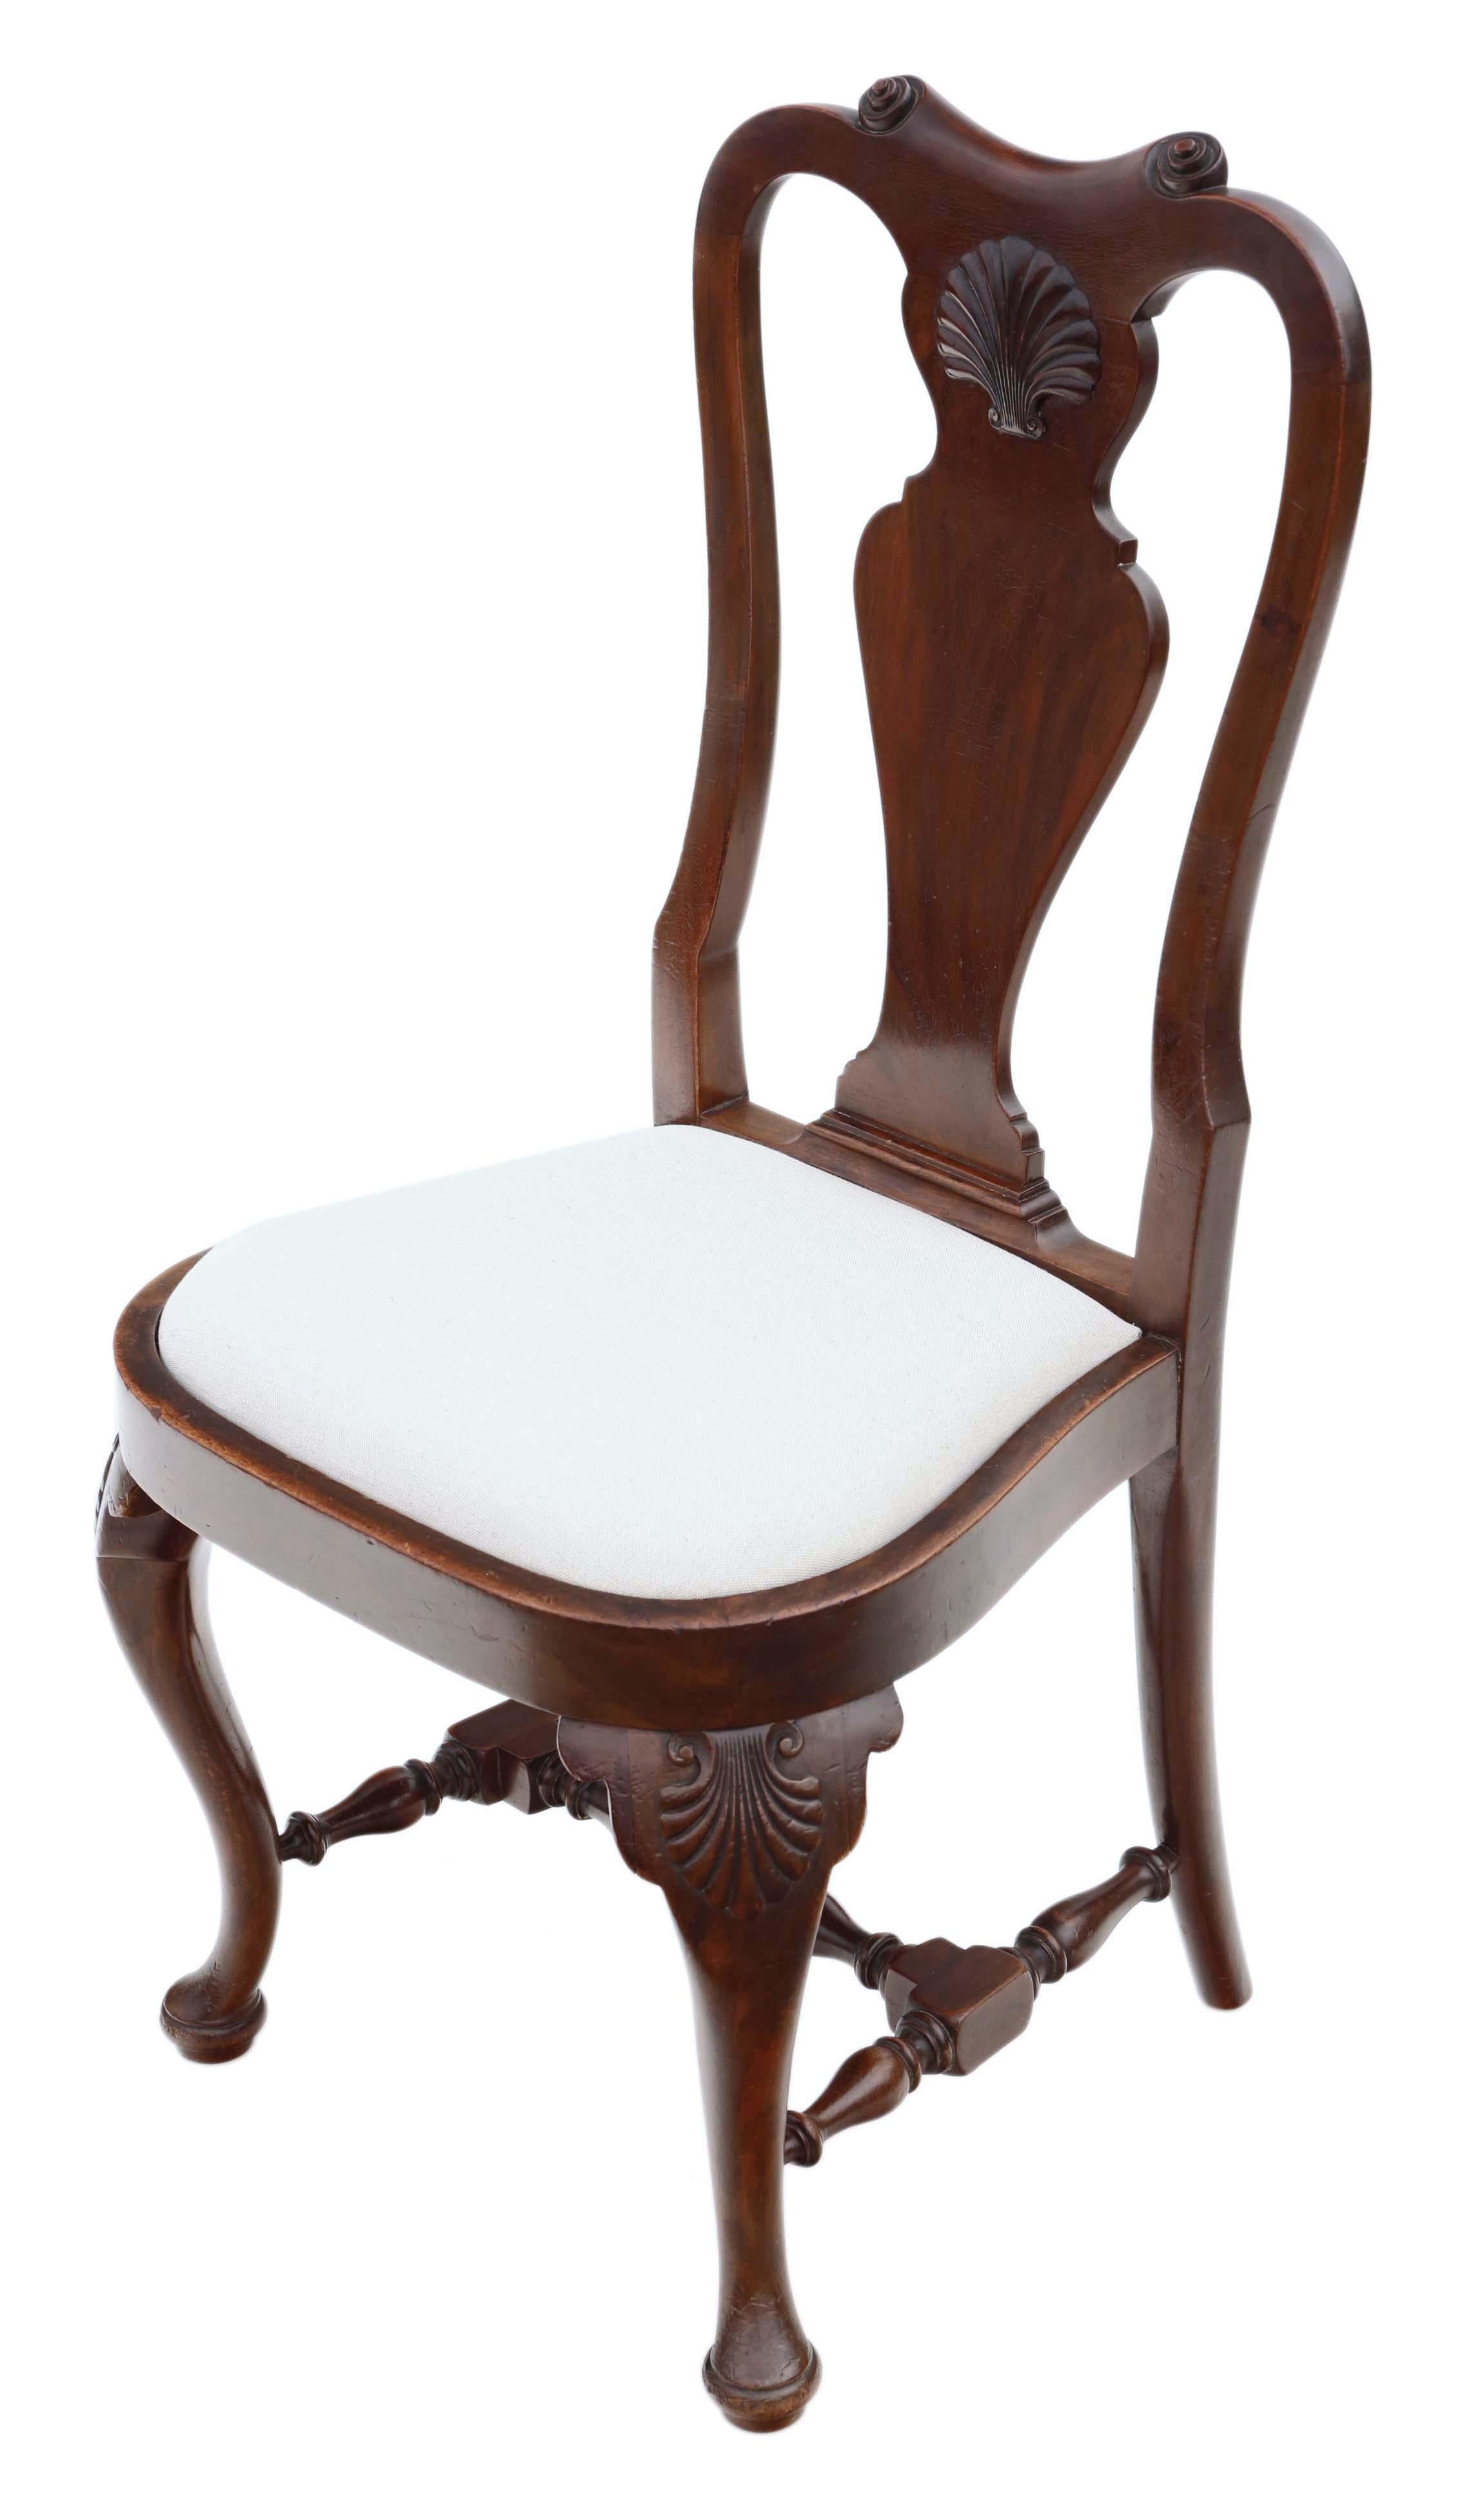 Early 20th Century Antique Fine Quality Set of 6 Queen Anne Revival Mahogany Dining Chairs C1900